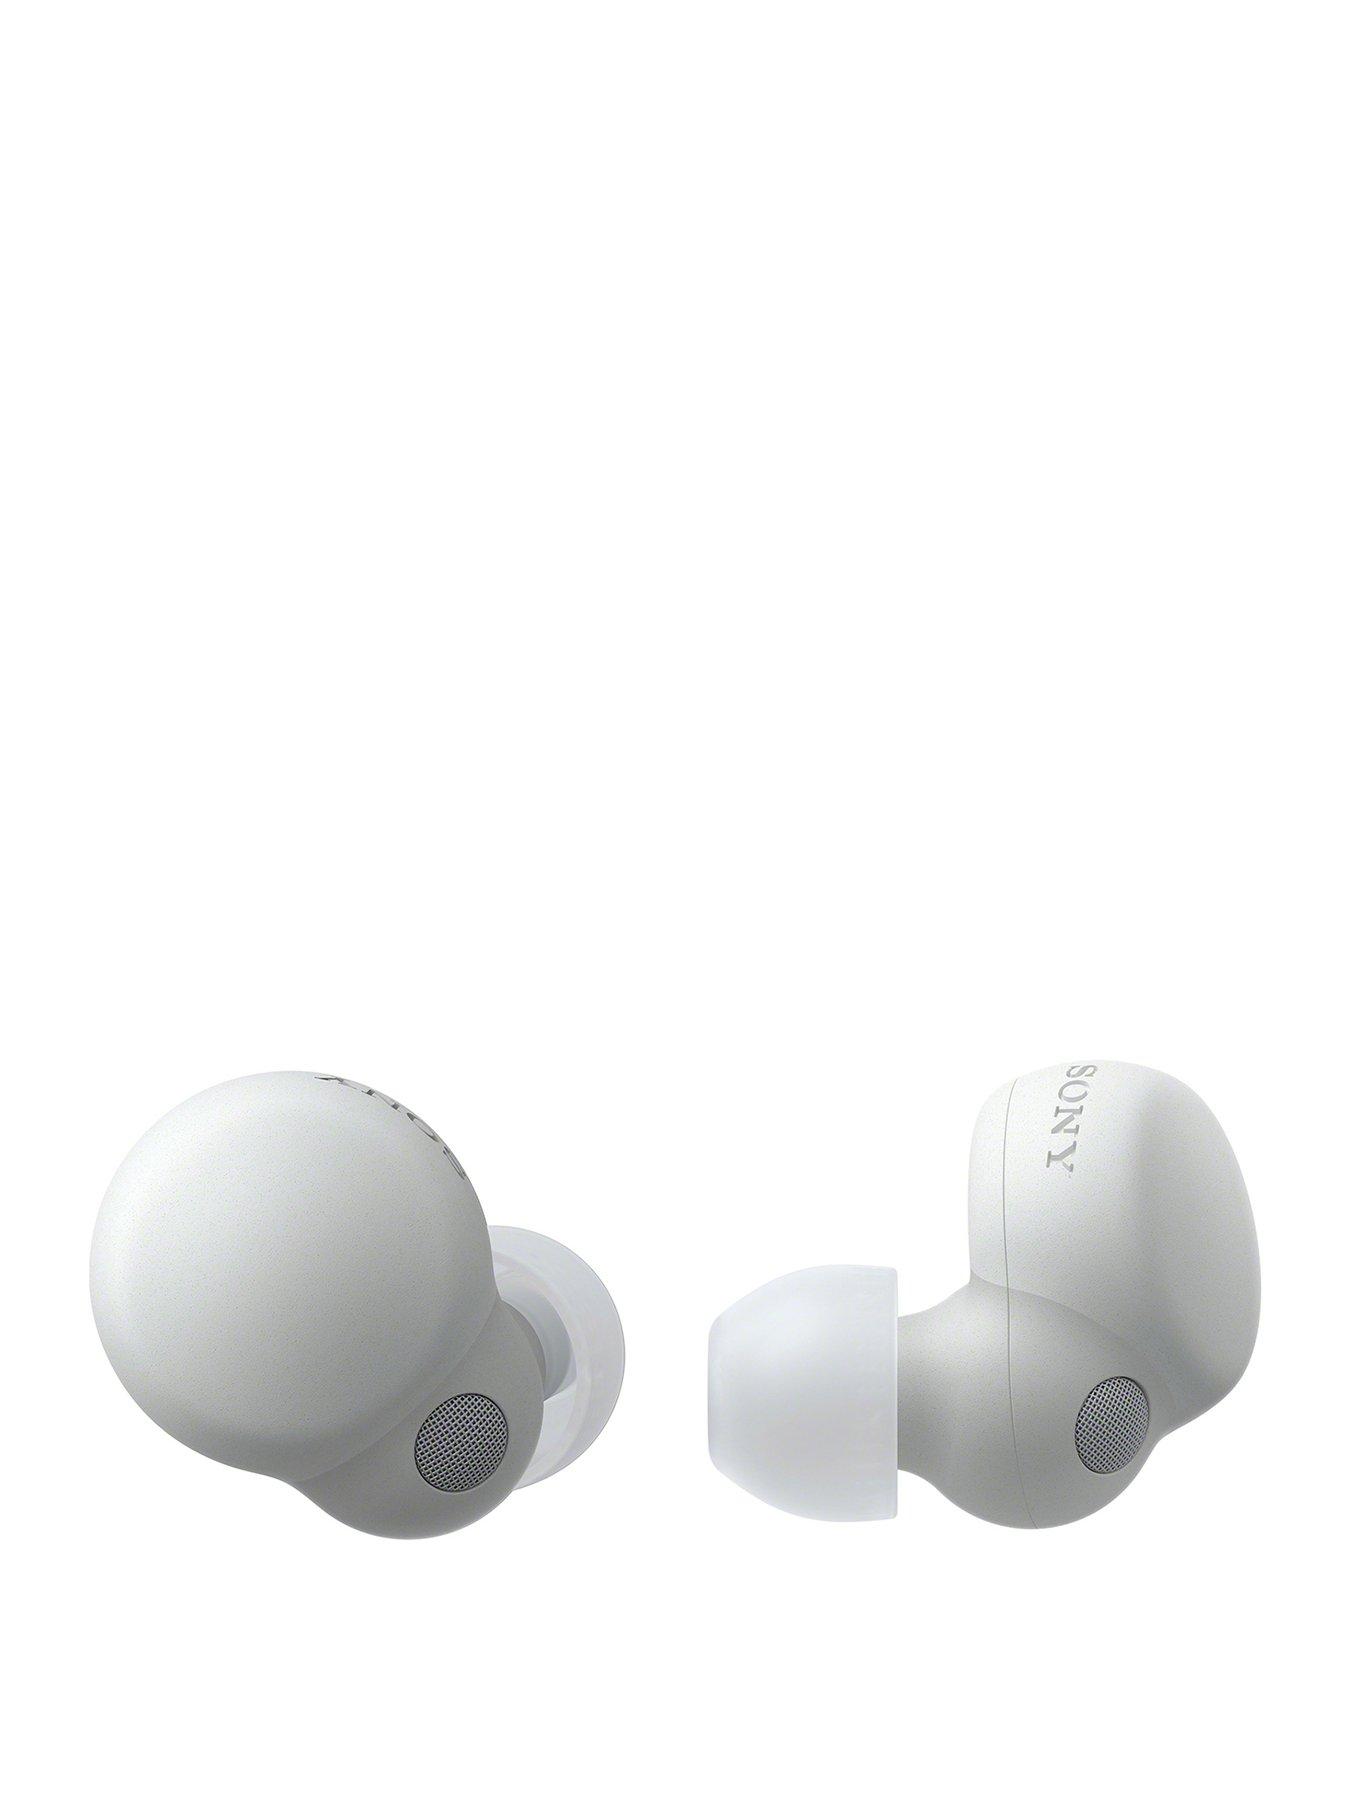 Bolt Axtion Air Tube Stereo Ear buds - Universal Acoustic Wired Headphones  with Mic & Volume Control